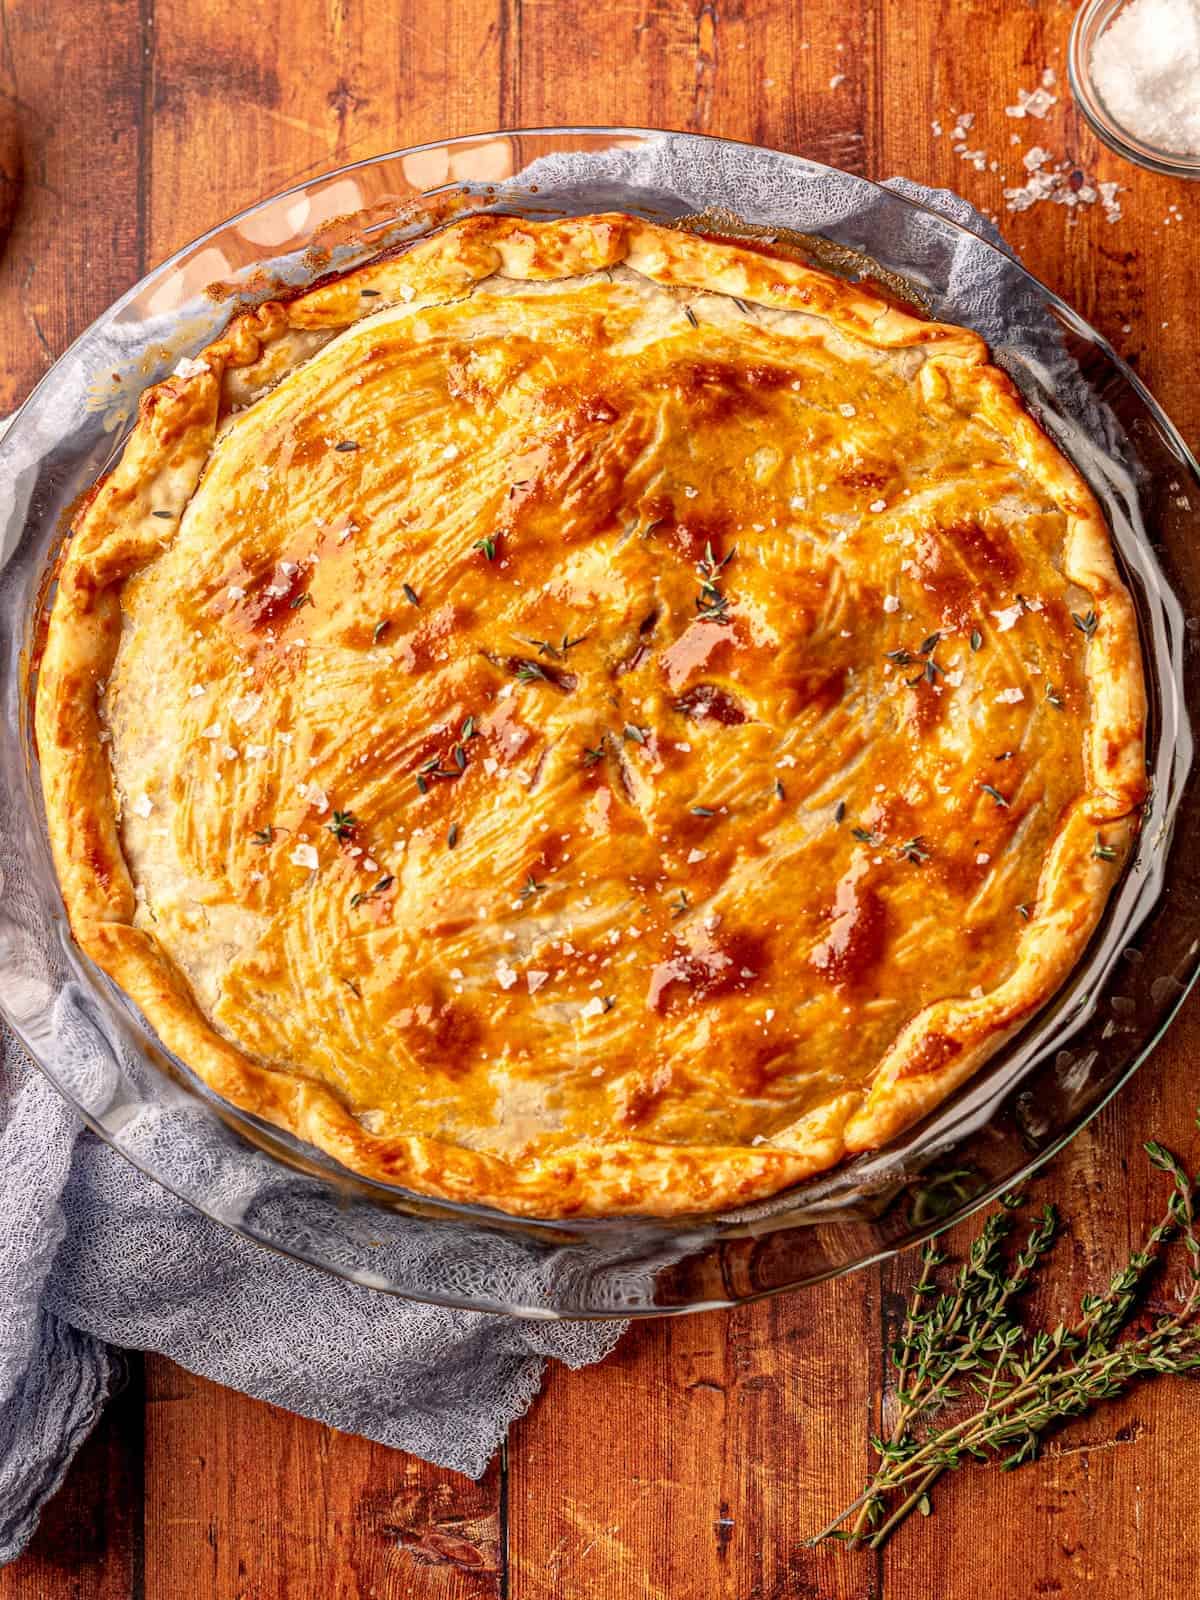 A quiche, topped with a savory chuck steak filling, is elegantly presented on a wooden table.